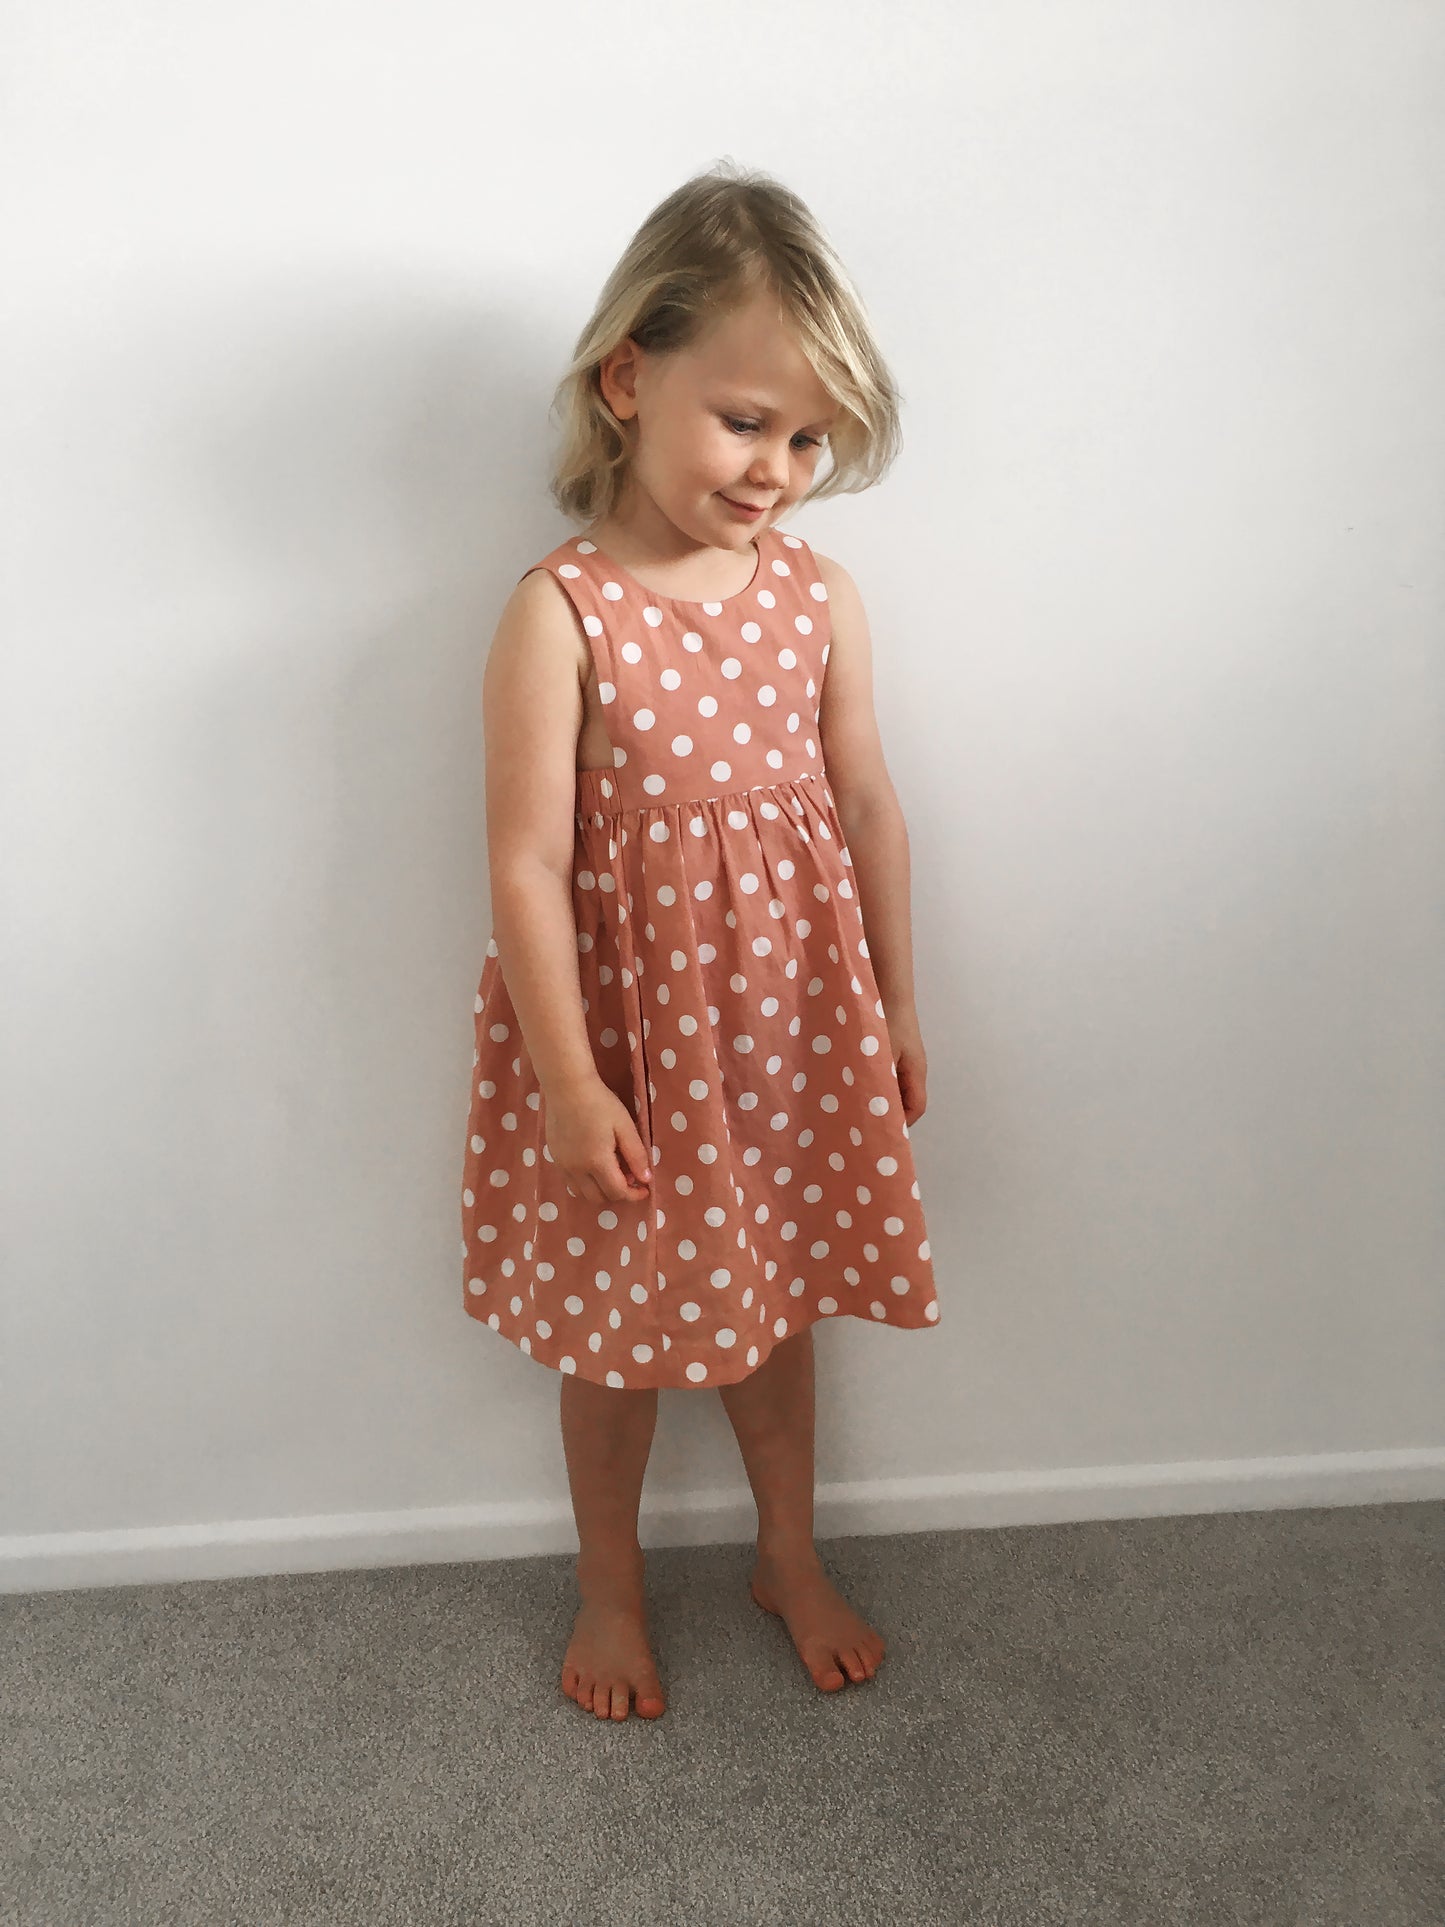 A small girl waiting patiently for her mama to finish taking photos of her pink spotty dress so that the promise of an easter egg can be enjoyed.